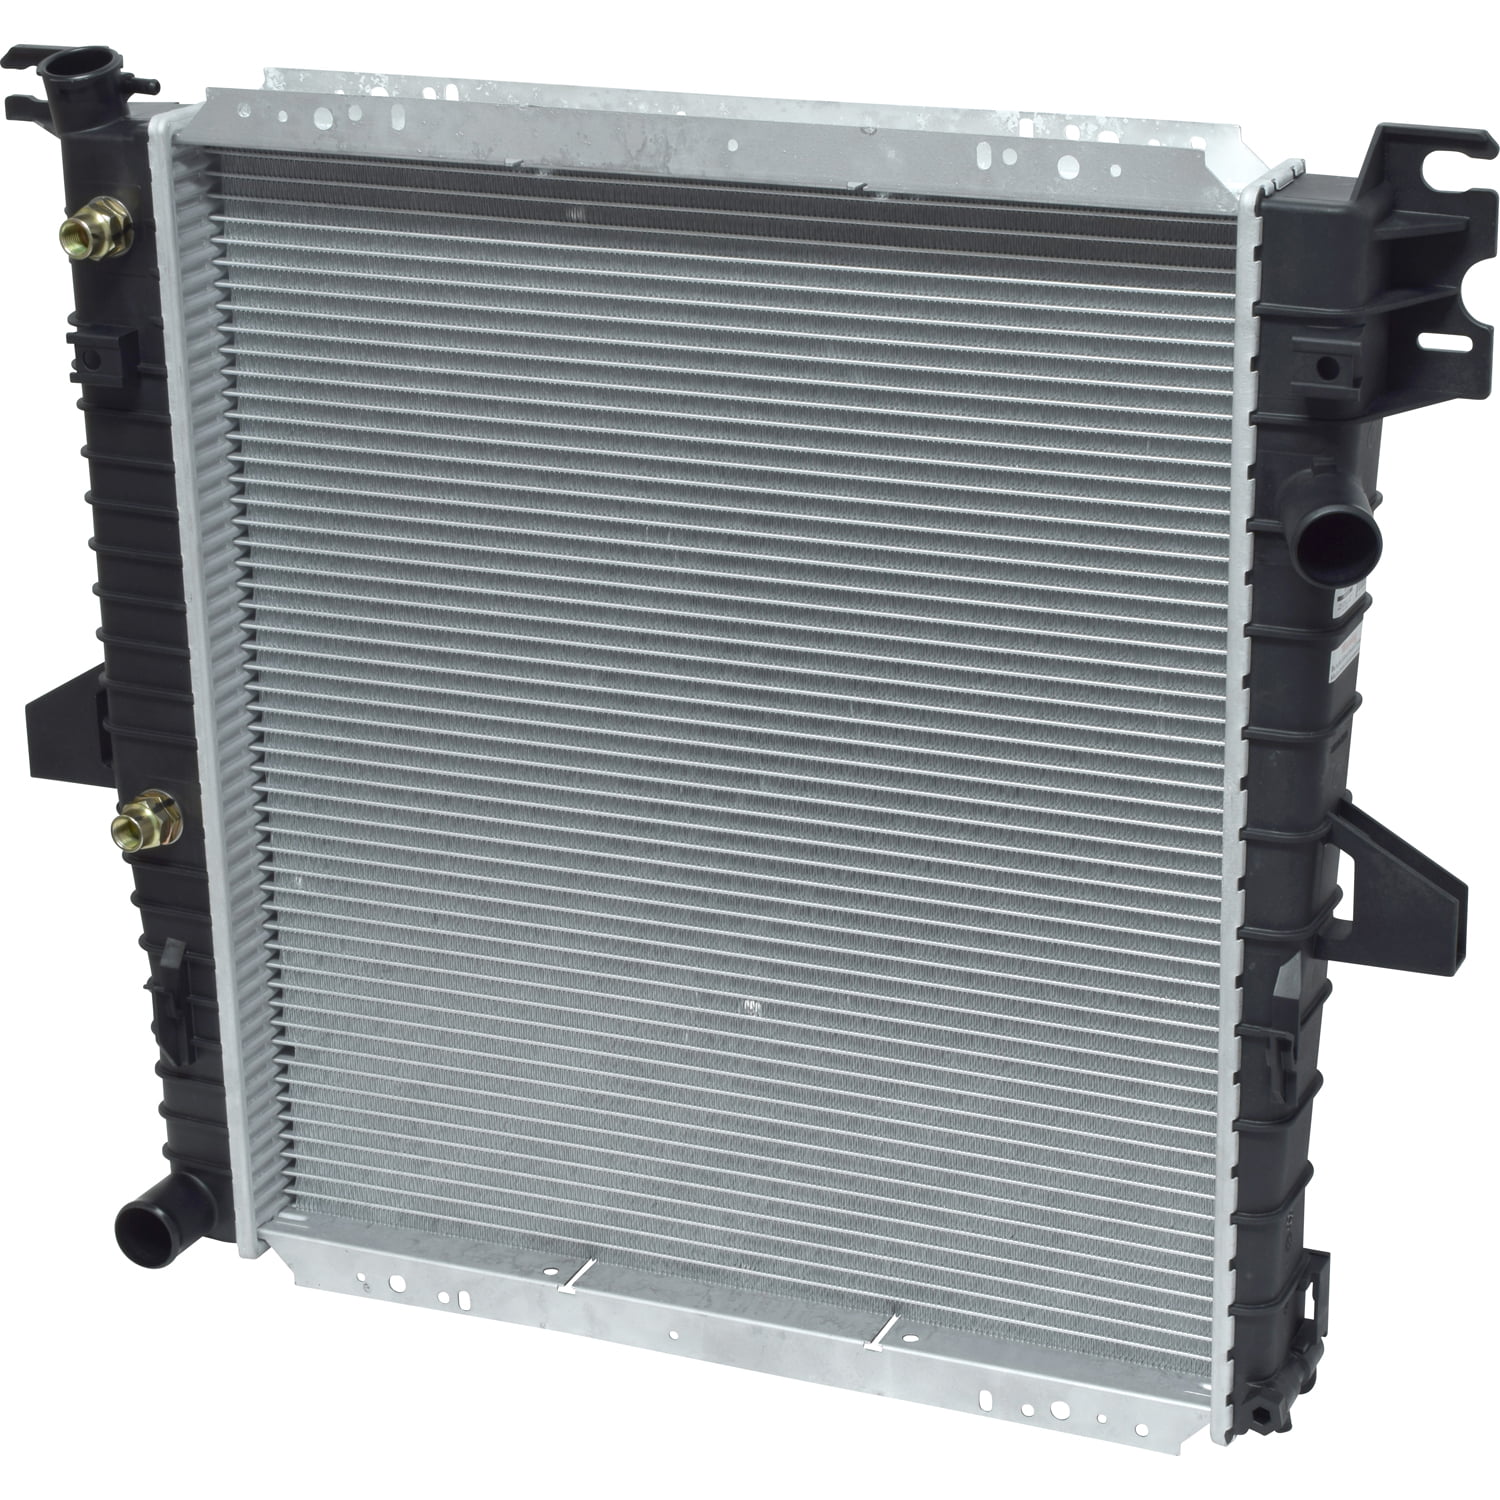 Fits TYC2308 Brand New Replacement Aluminum Radiator with Warranty 